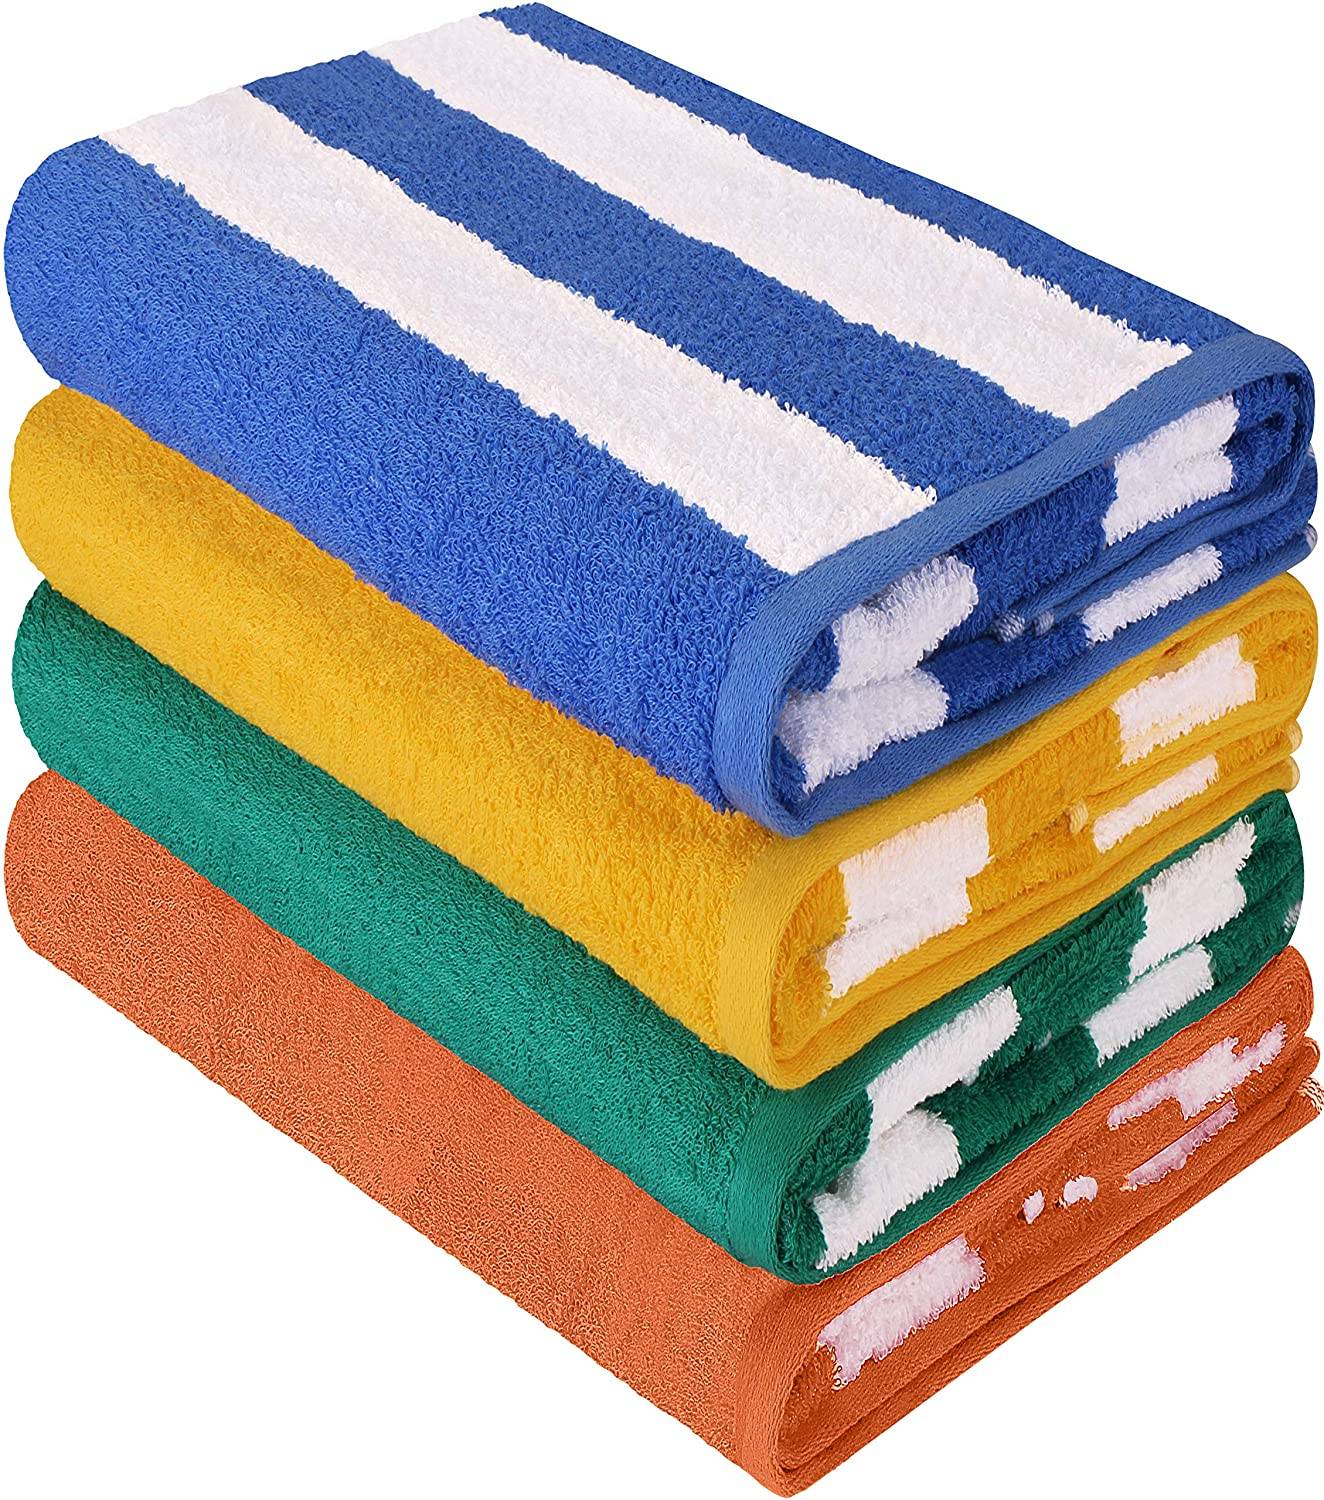 High Quality for Children Poncho Towel - Terry Cabana Stripe Beach Towel – 100% Ring Spun Cotton Large Pool Towels, Soft and Quick Dry Swim Terry towels – SUPER